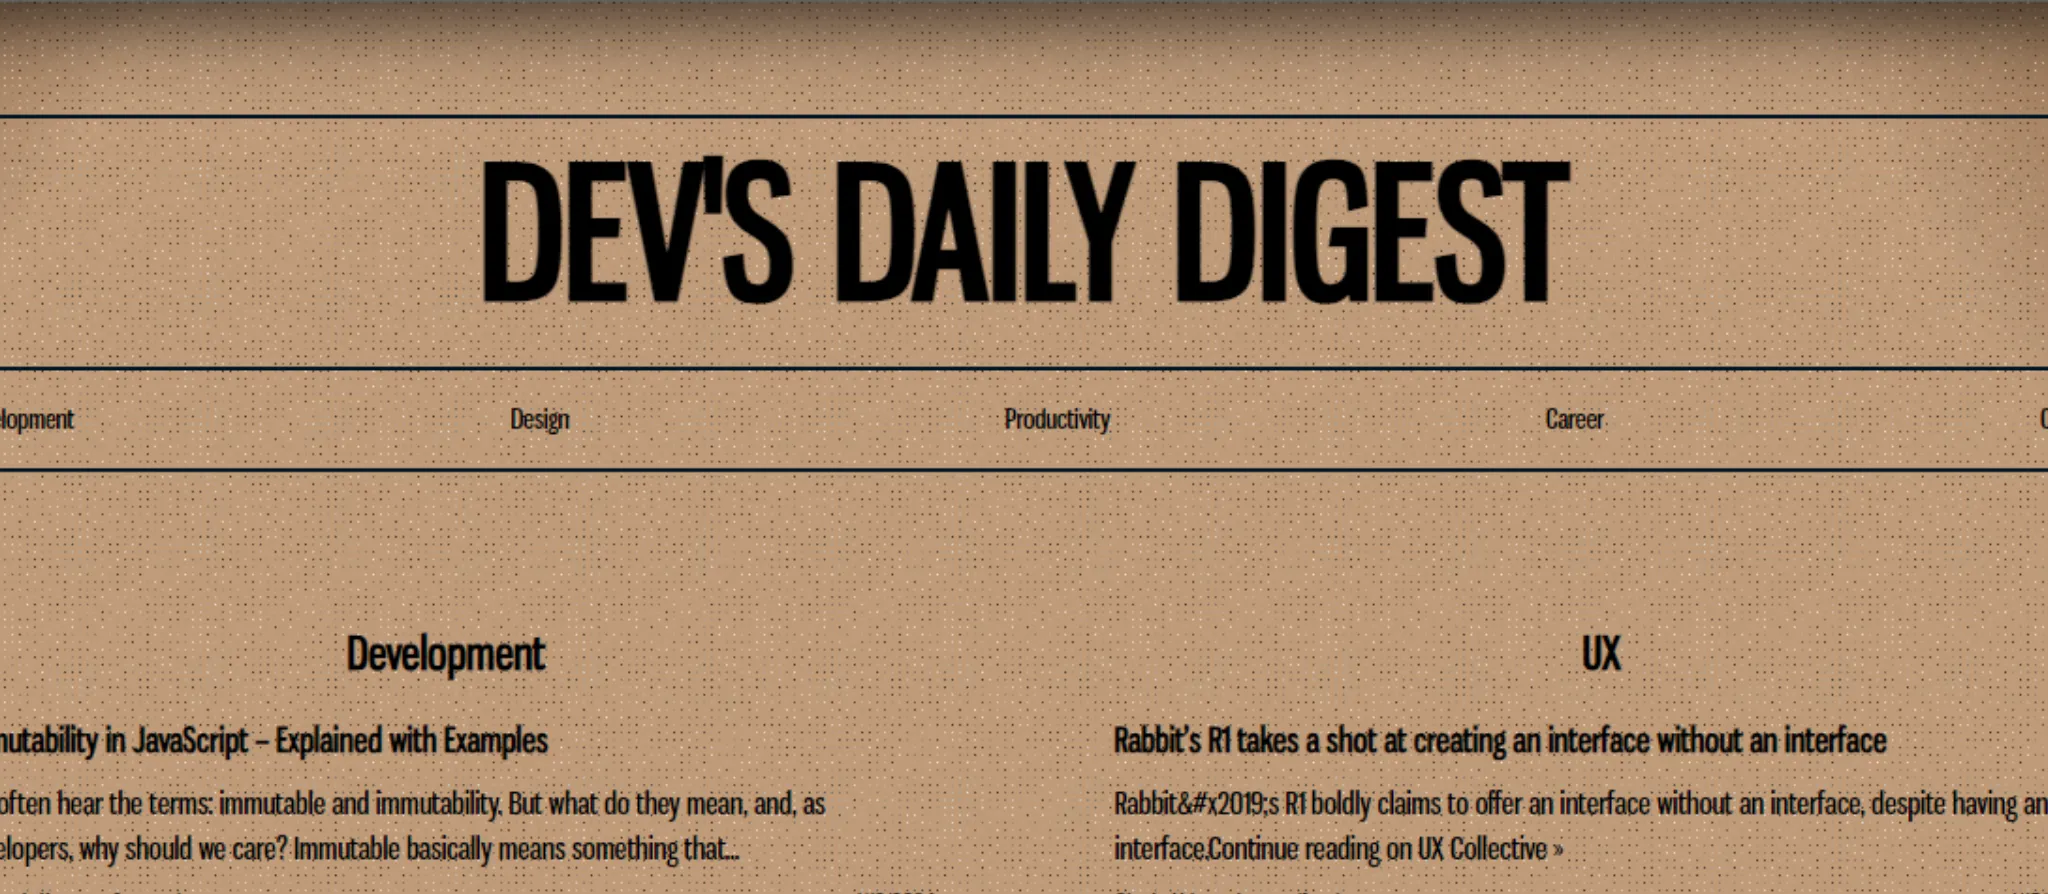 An image of the front page of Dev's Daily Digest, with the title and a few articles.